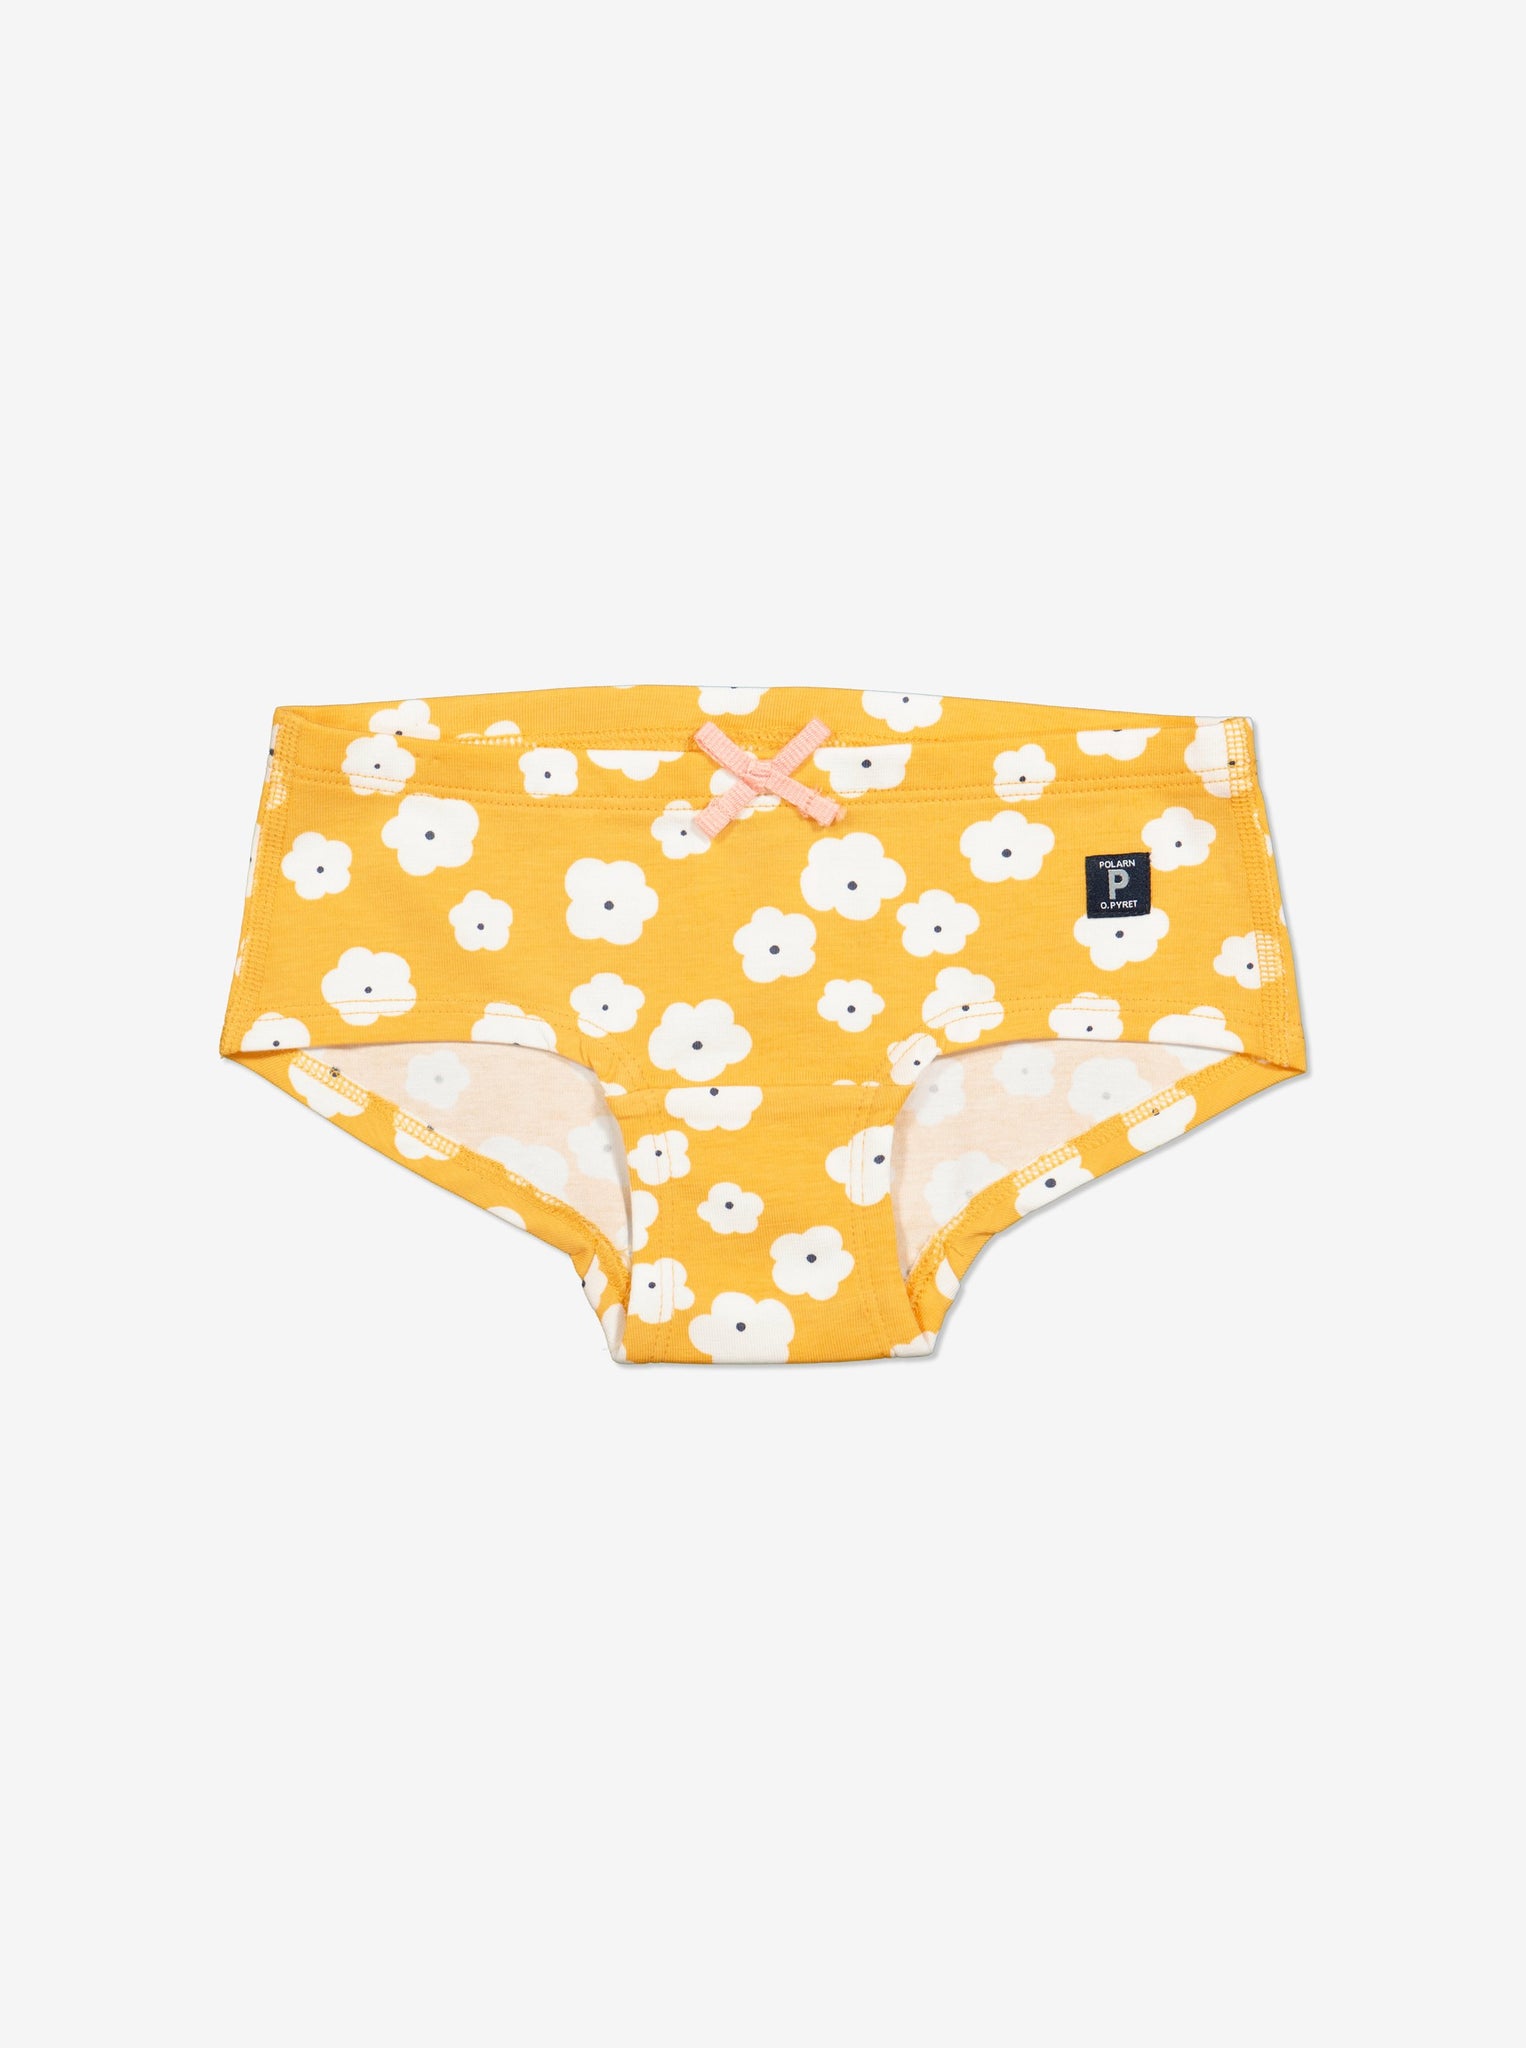  Organic Yellow Floral Girls Briefs from Polarn O. Pyret Kidswear. Made from sustainably sourced materials.